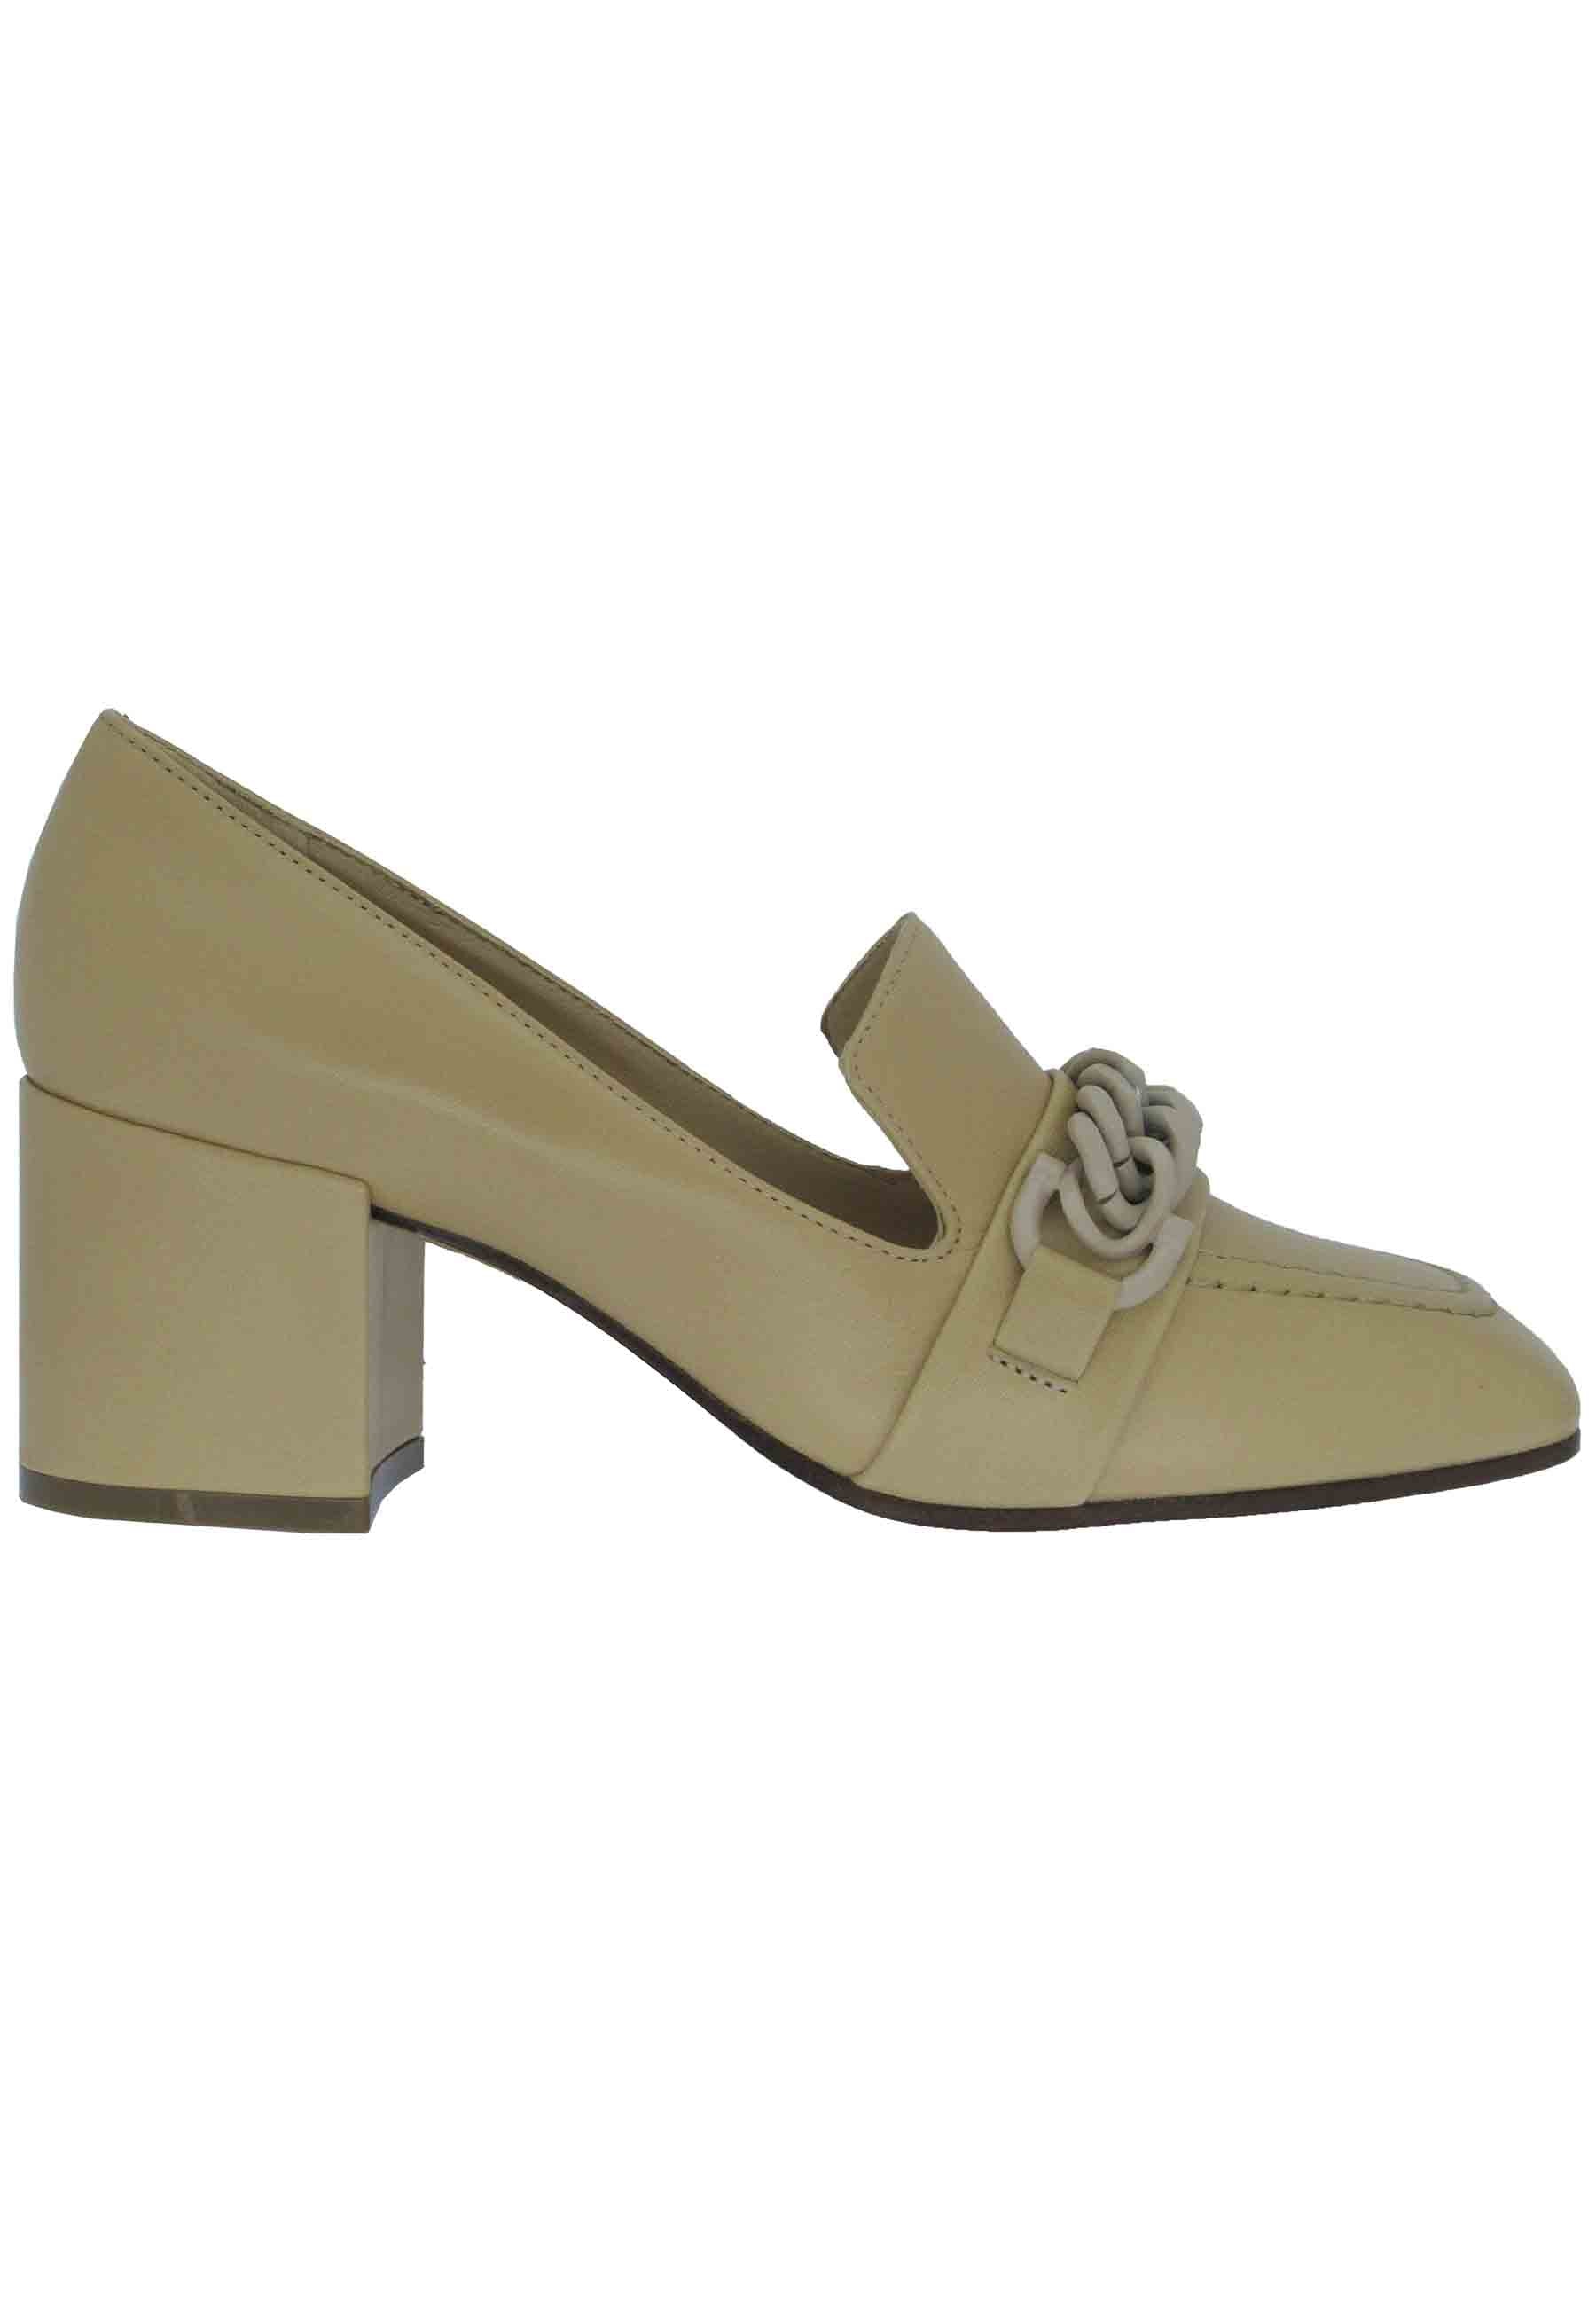 Women's beige leather loafers with matching chain